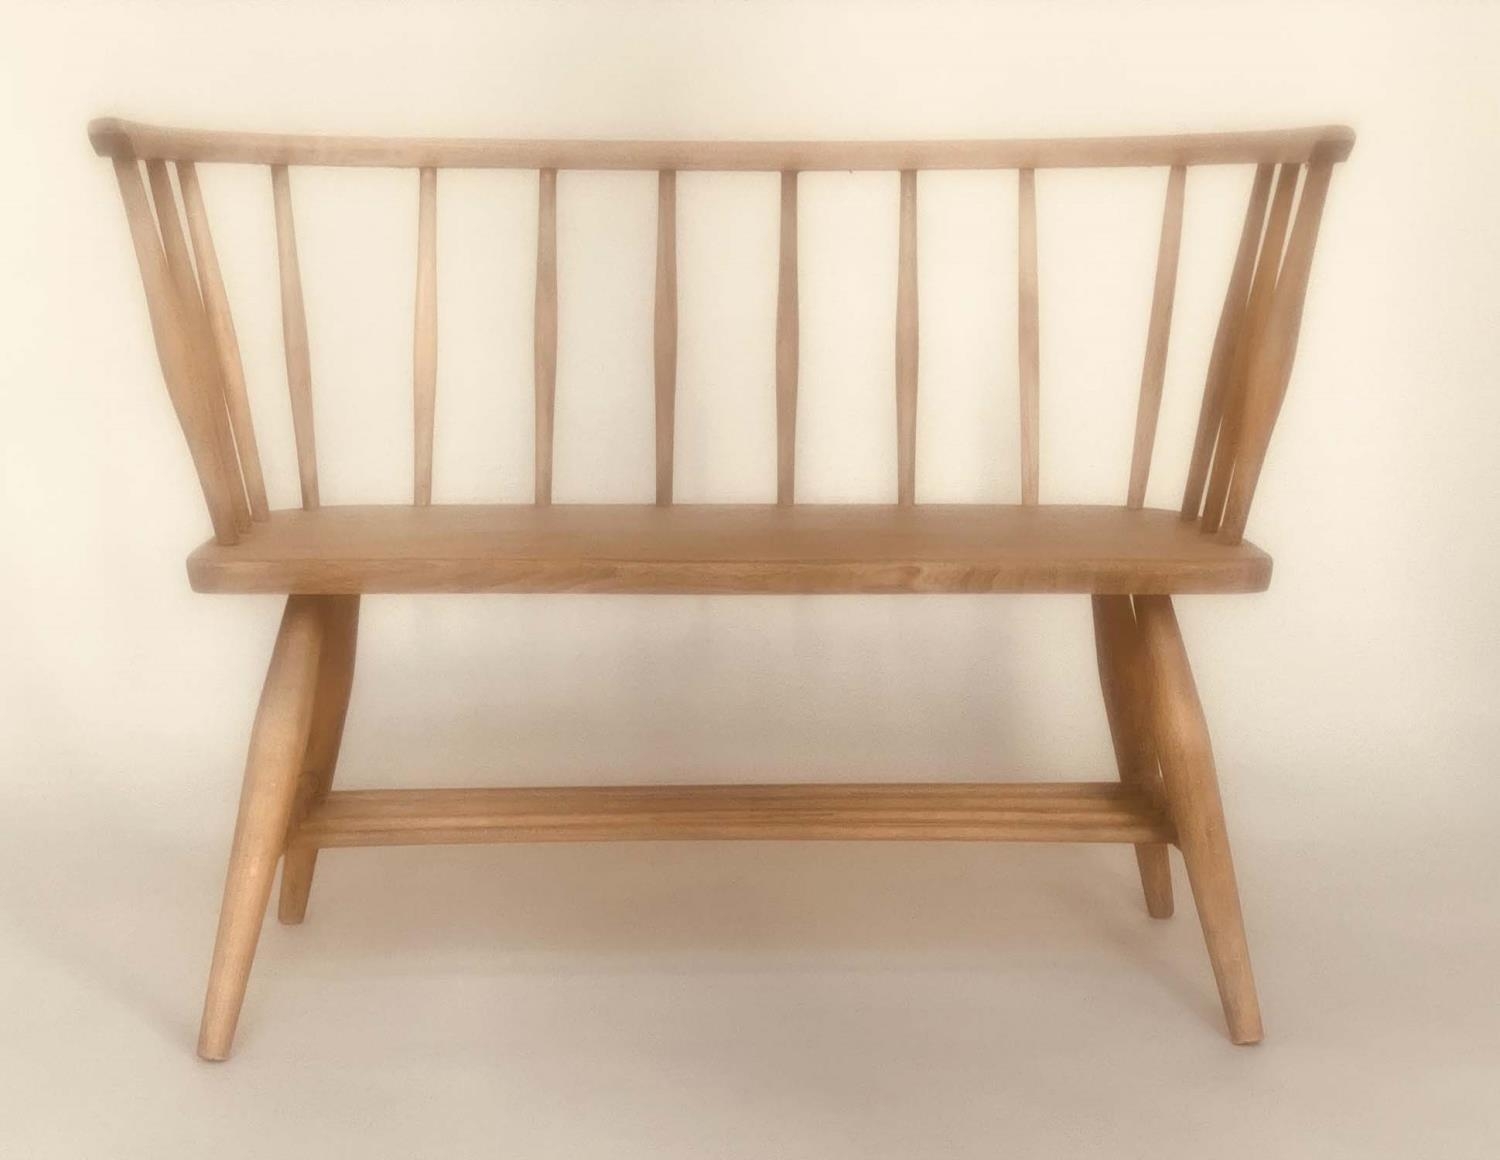 ERCOL STYLE HALL SEAT, mid 20th century elm, with enclosing rail back and solid seat in the manner